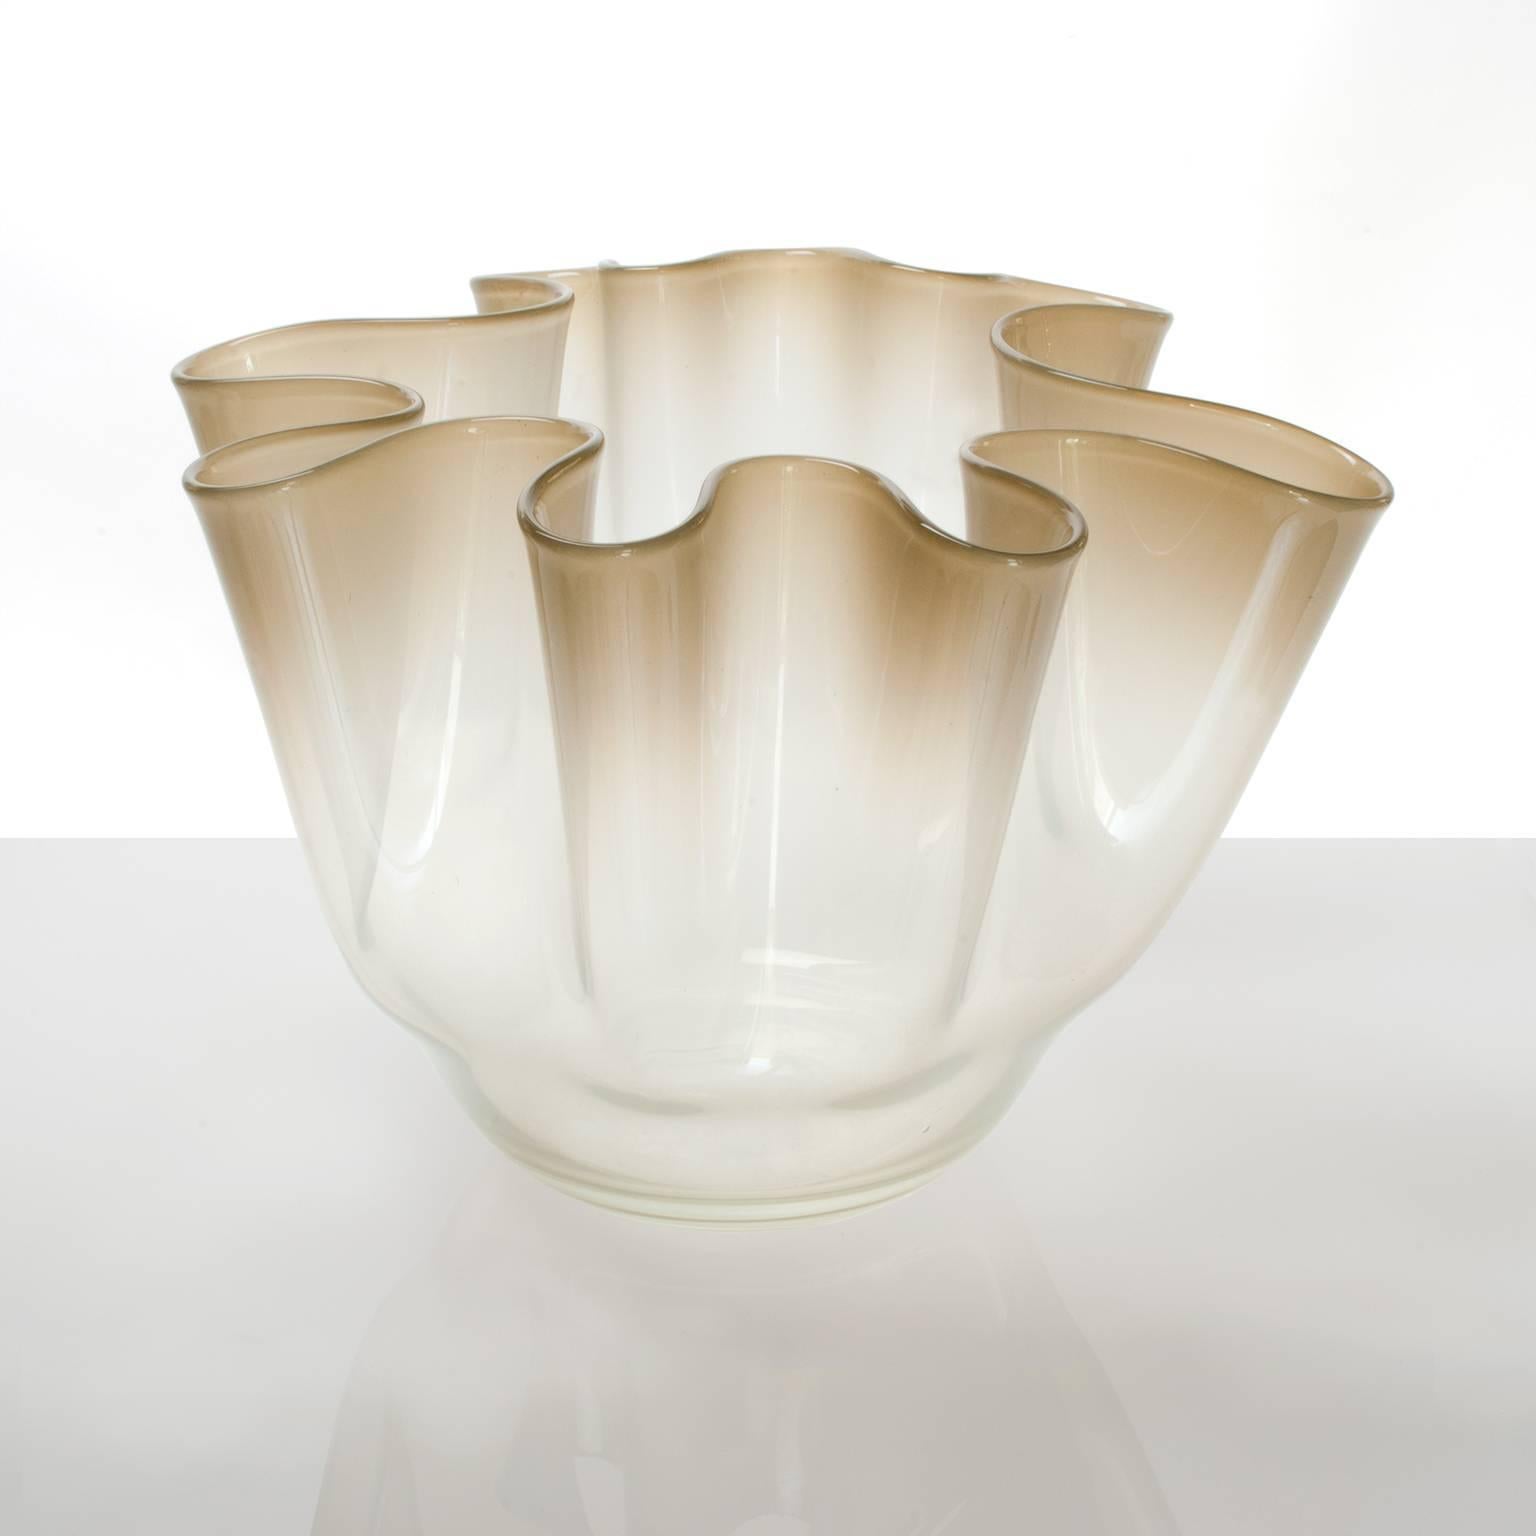 A large Danish Mid-Century Modern bowl / vase by Kylle Svanlund for Holmgaard Glasværk, circa 1960s. The piece features a softly folded form in clear to pale gold color glass. Marked on bottom.
Measures: Height 10